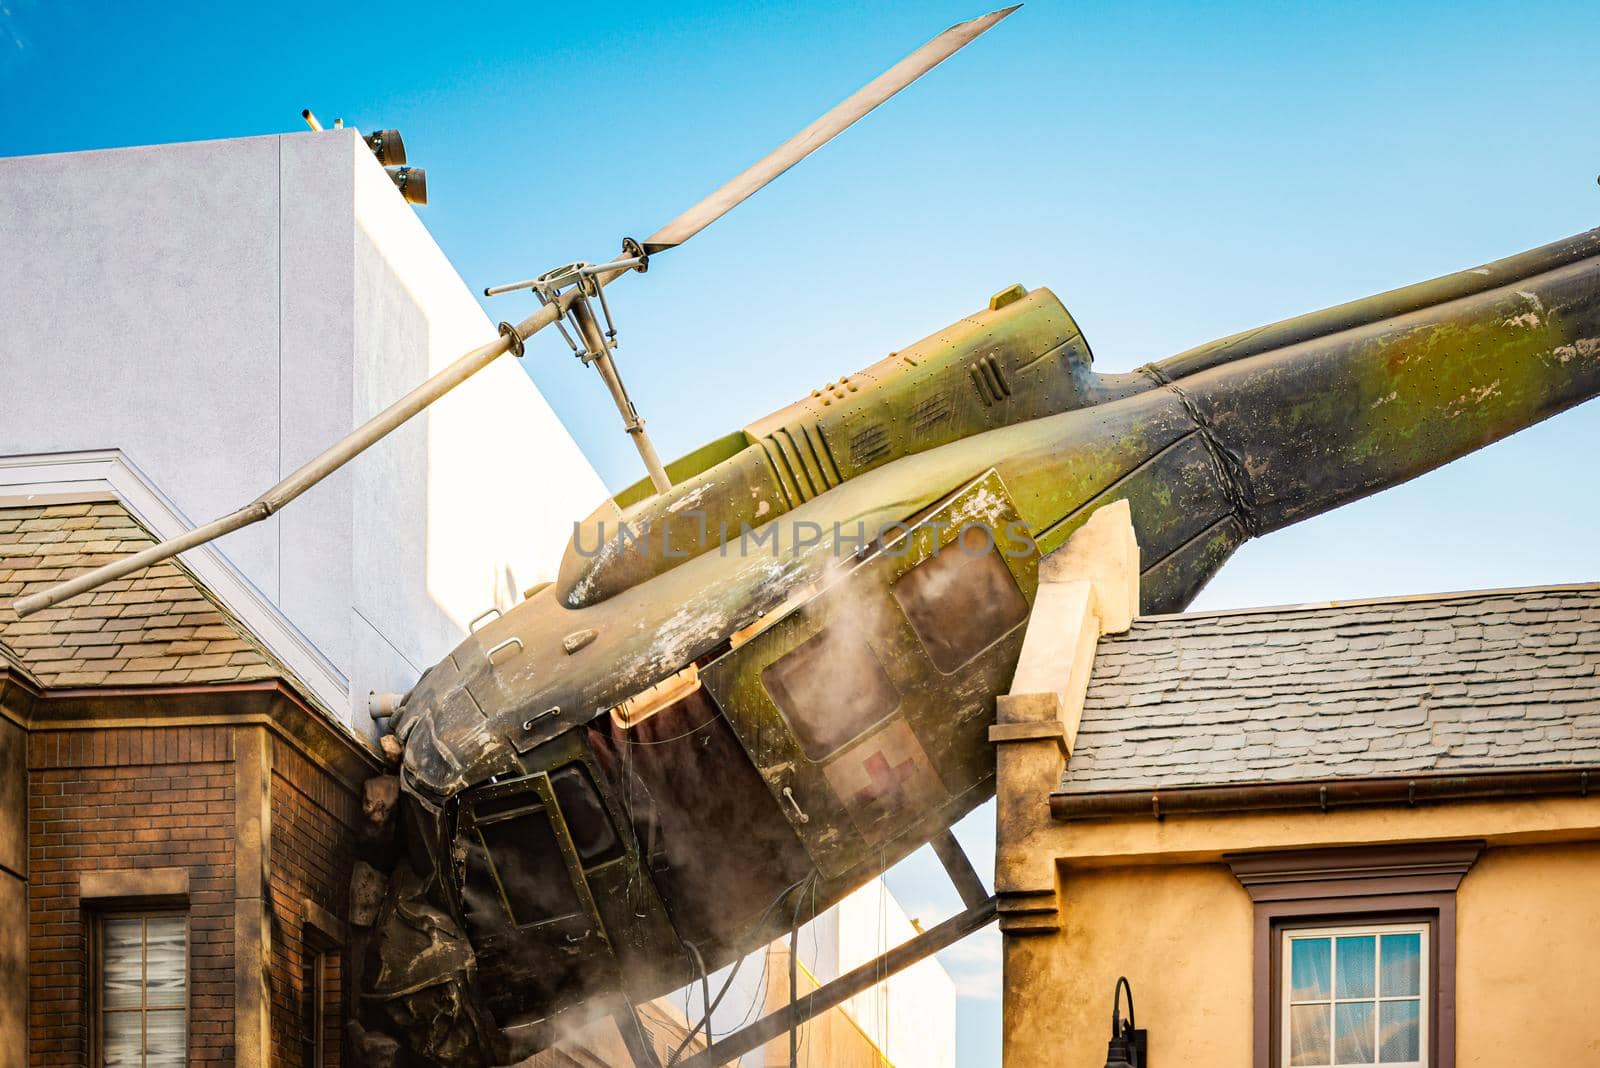 Army medical helicopter crashed into houses